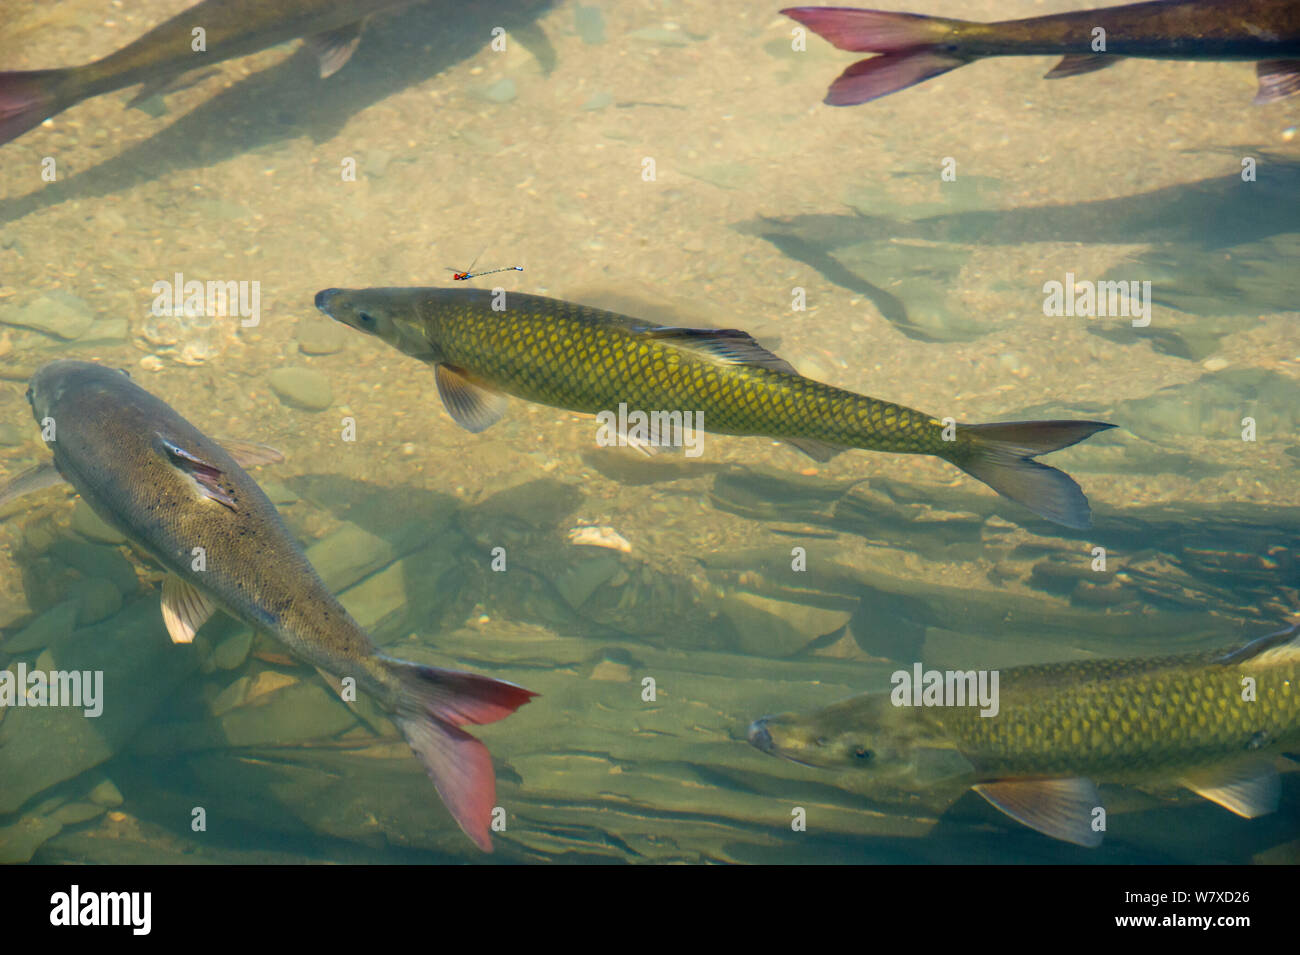 Endemic Clanwilliam sawfin (Barbus serra) and Clanwilliam sandfish (Labeo seeberi) released into the Koebee-Oorlogskloof river tributary. Rietkuil, Oorlogskloof gorge, Doring River, Western Cape, South Africa. Stock Photo